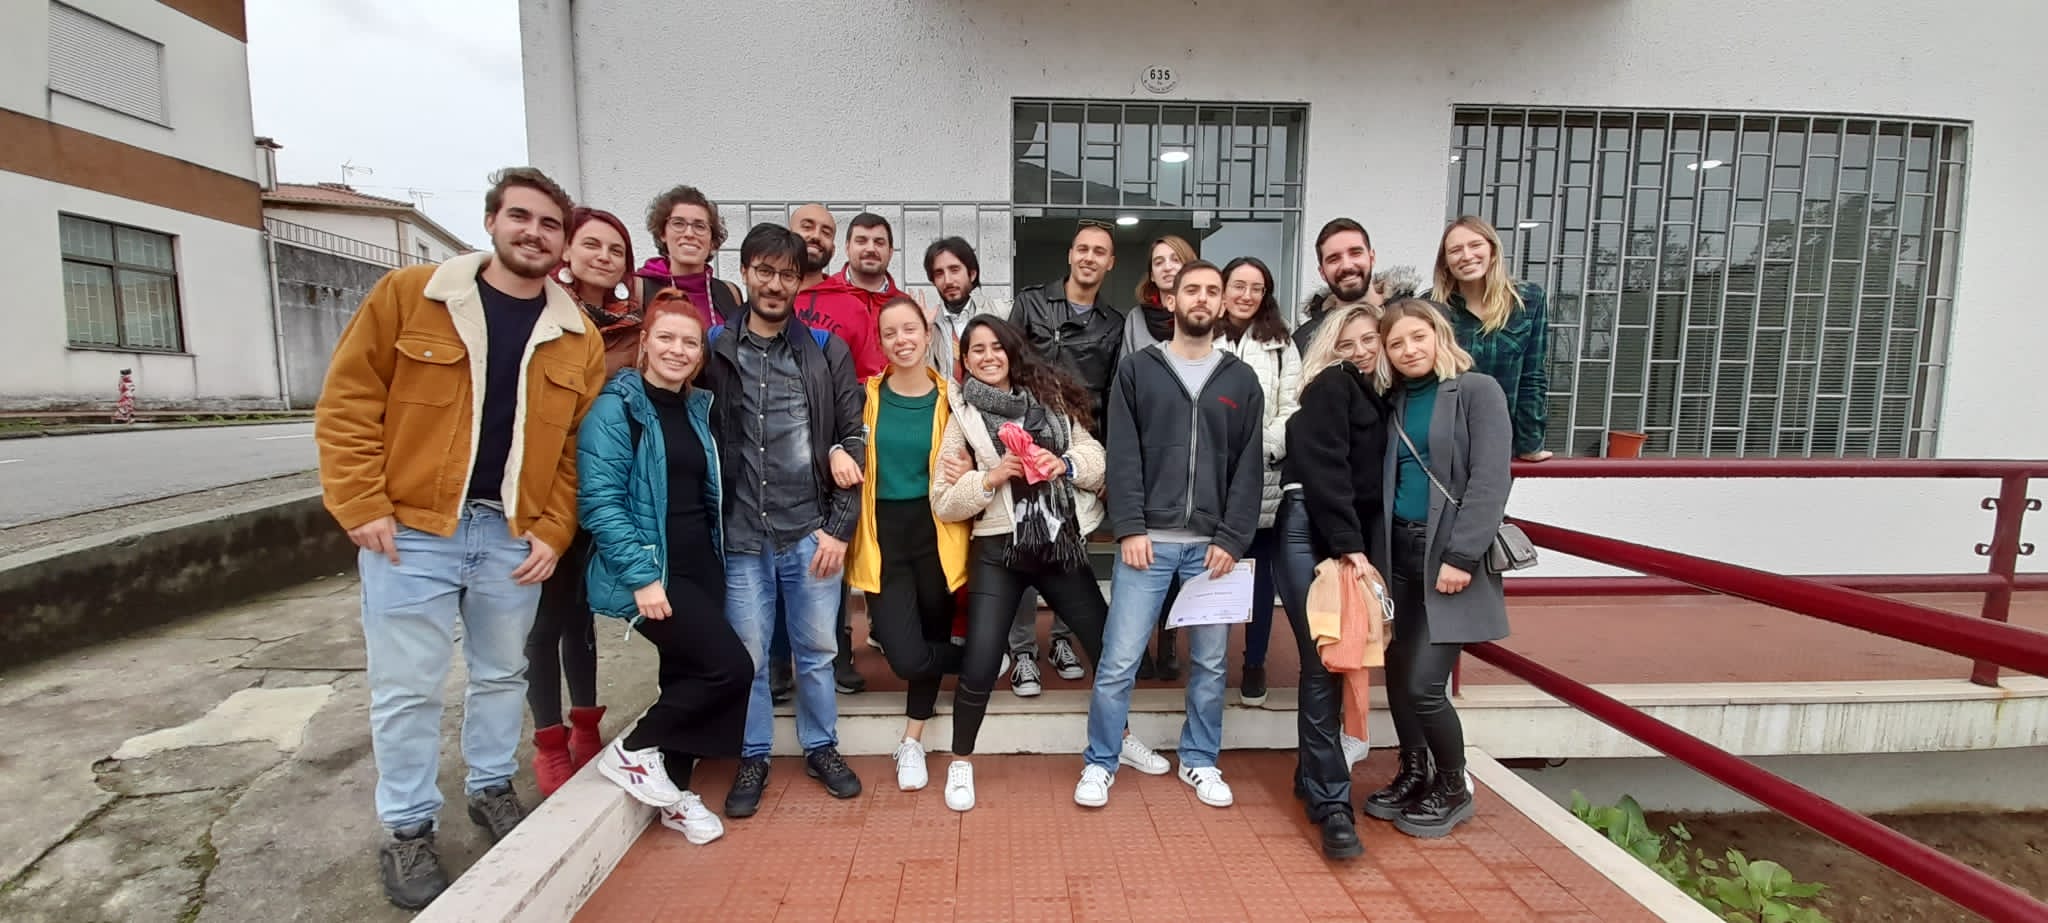 The training for staff of InterCat in circular and accessible tourism takes place in Portugal